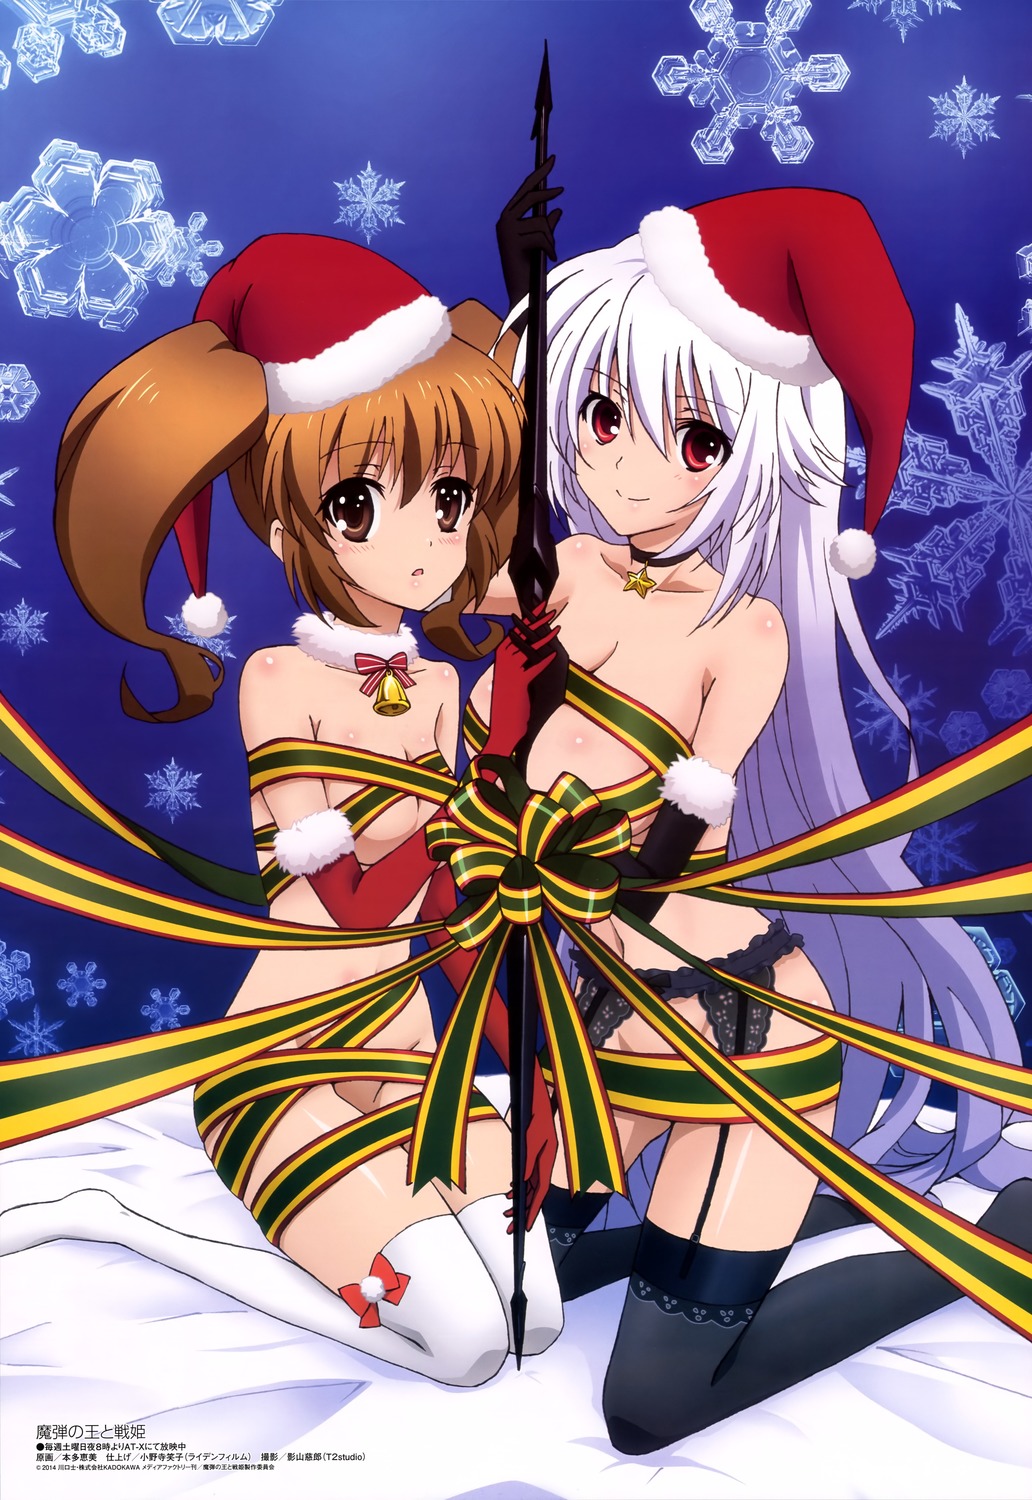 Holiday Greetings From The Anime World Part 2 Interest 14 12 25 Anime News Network